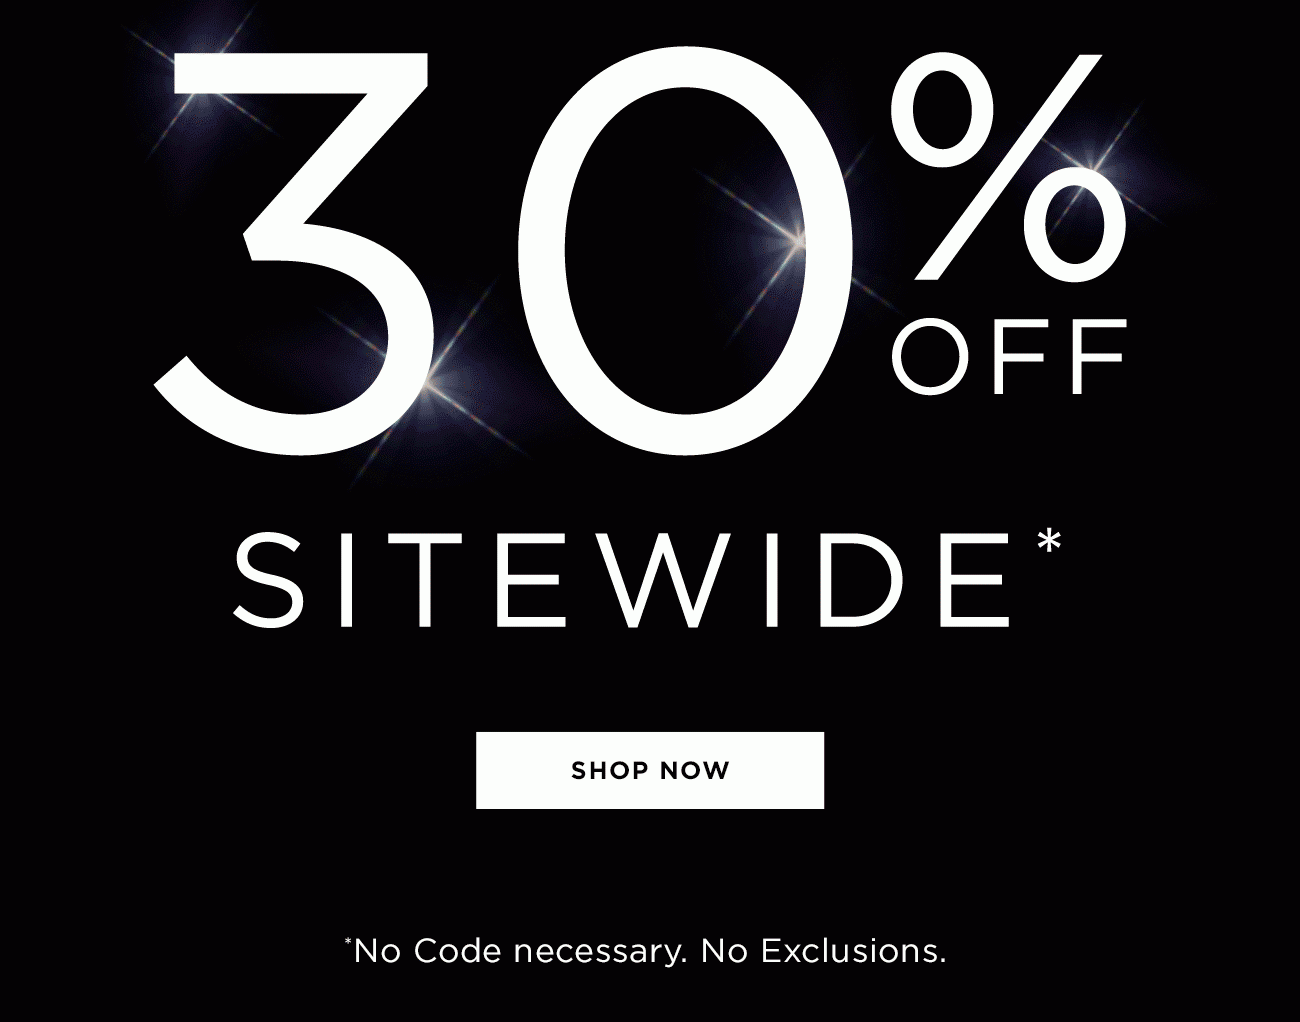 30% Off Sitewide - No Code Necessary